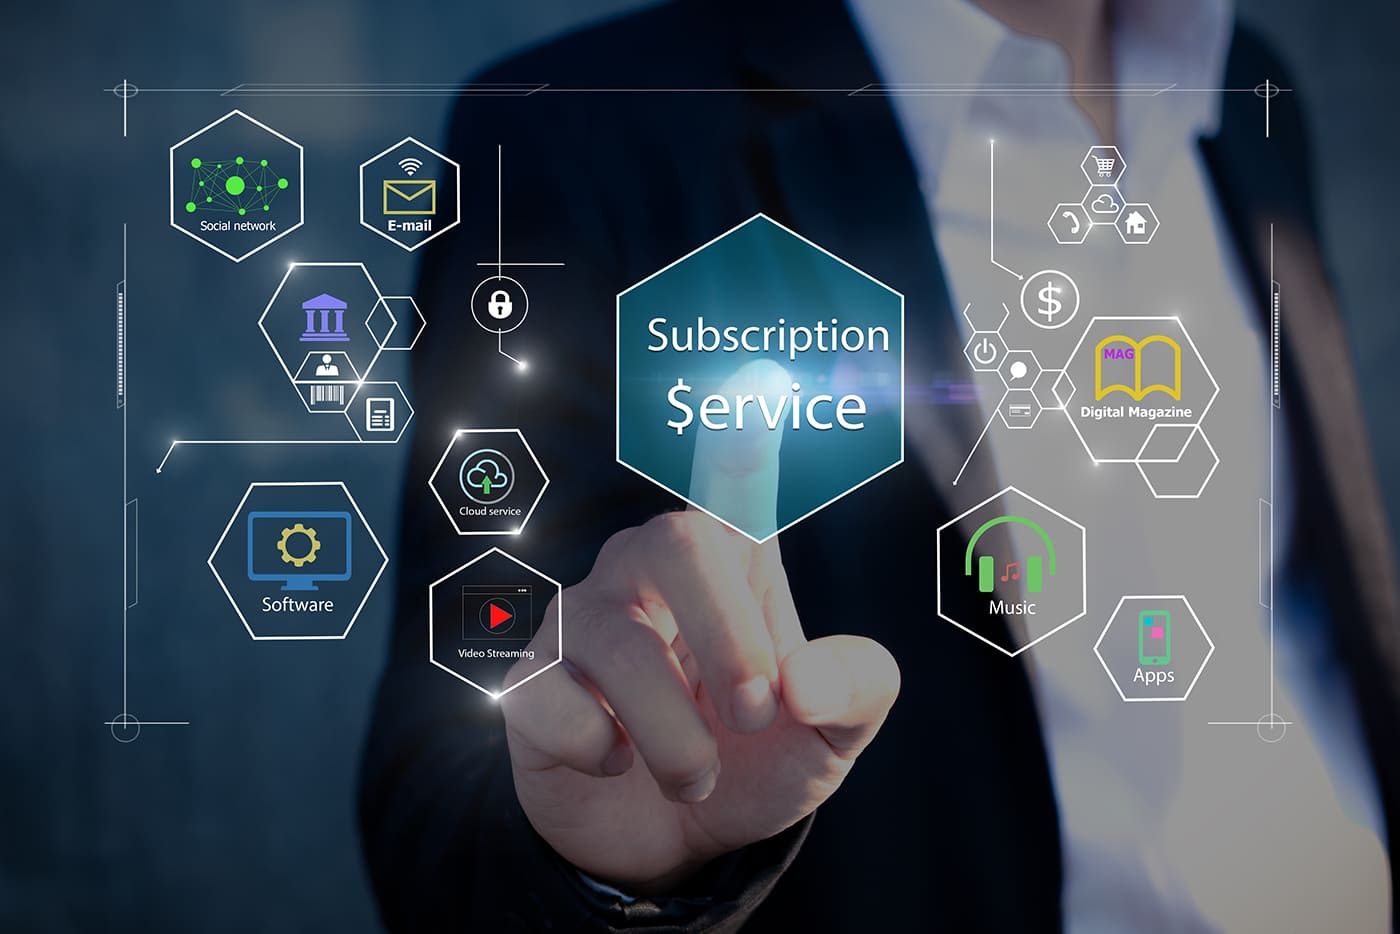 Everything-As-A-Service: Why All Brands Must Consider Subscription Models | Bernard Marr